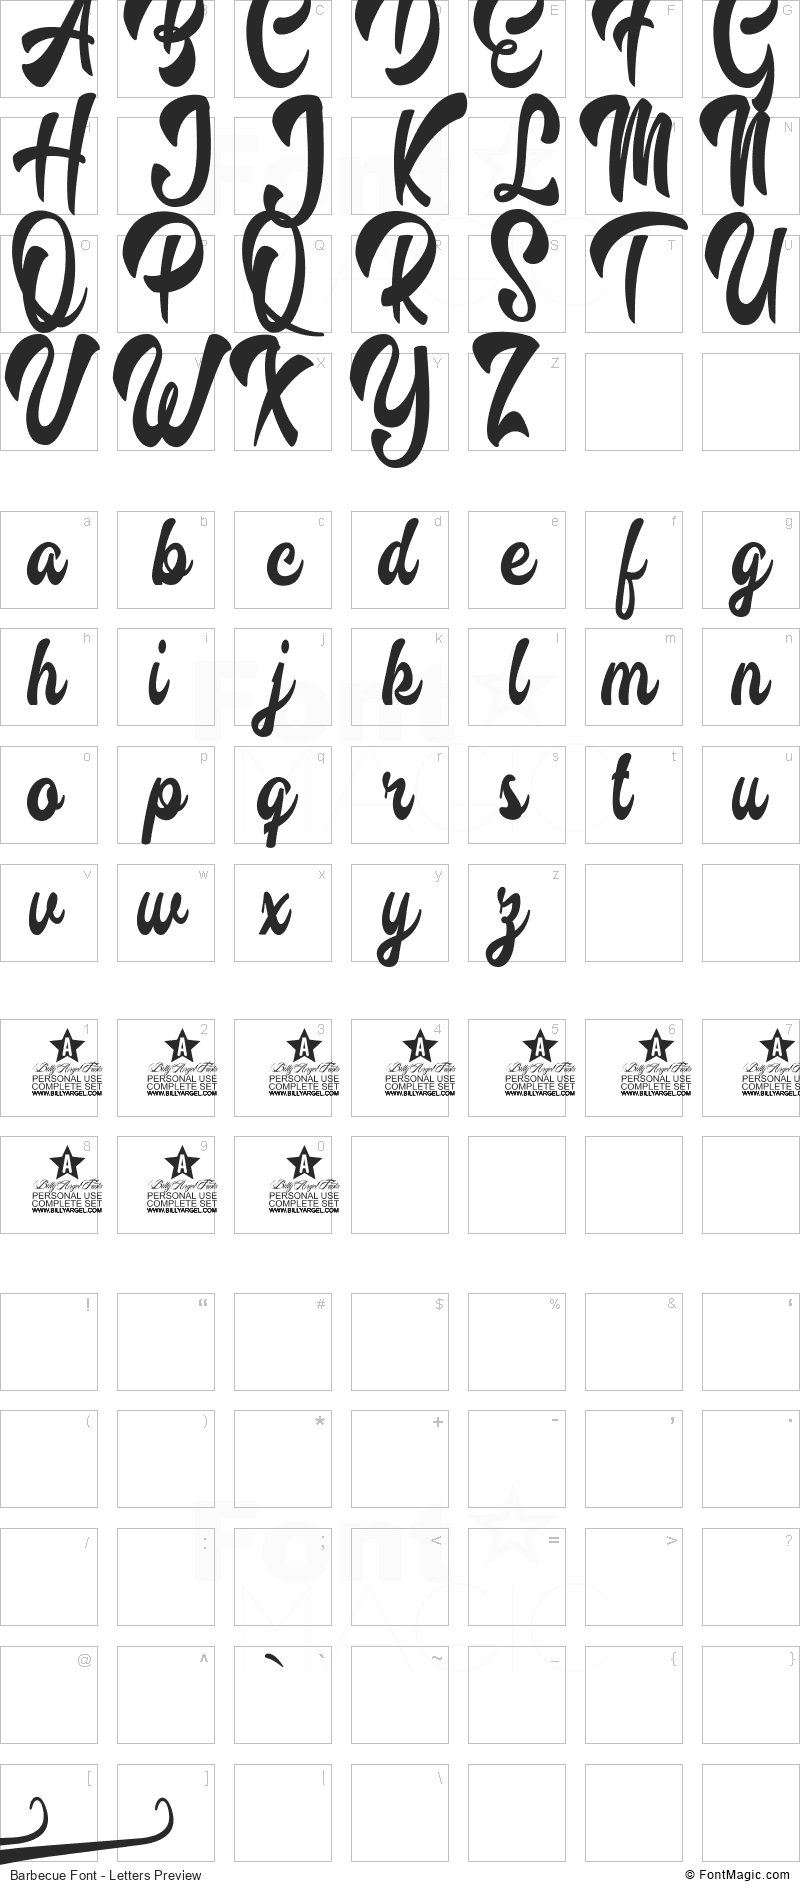 Barbecue Font - All Latters Preview Chart